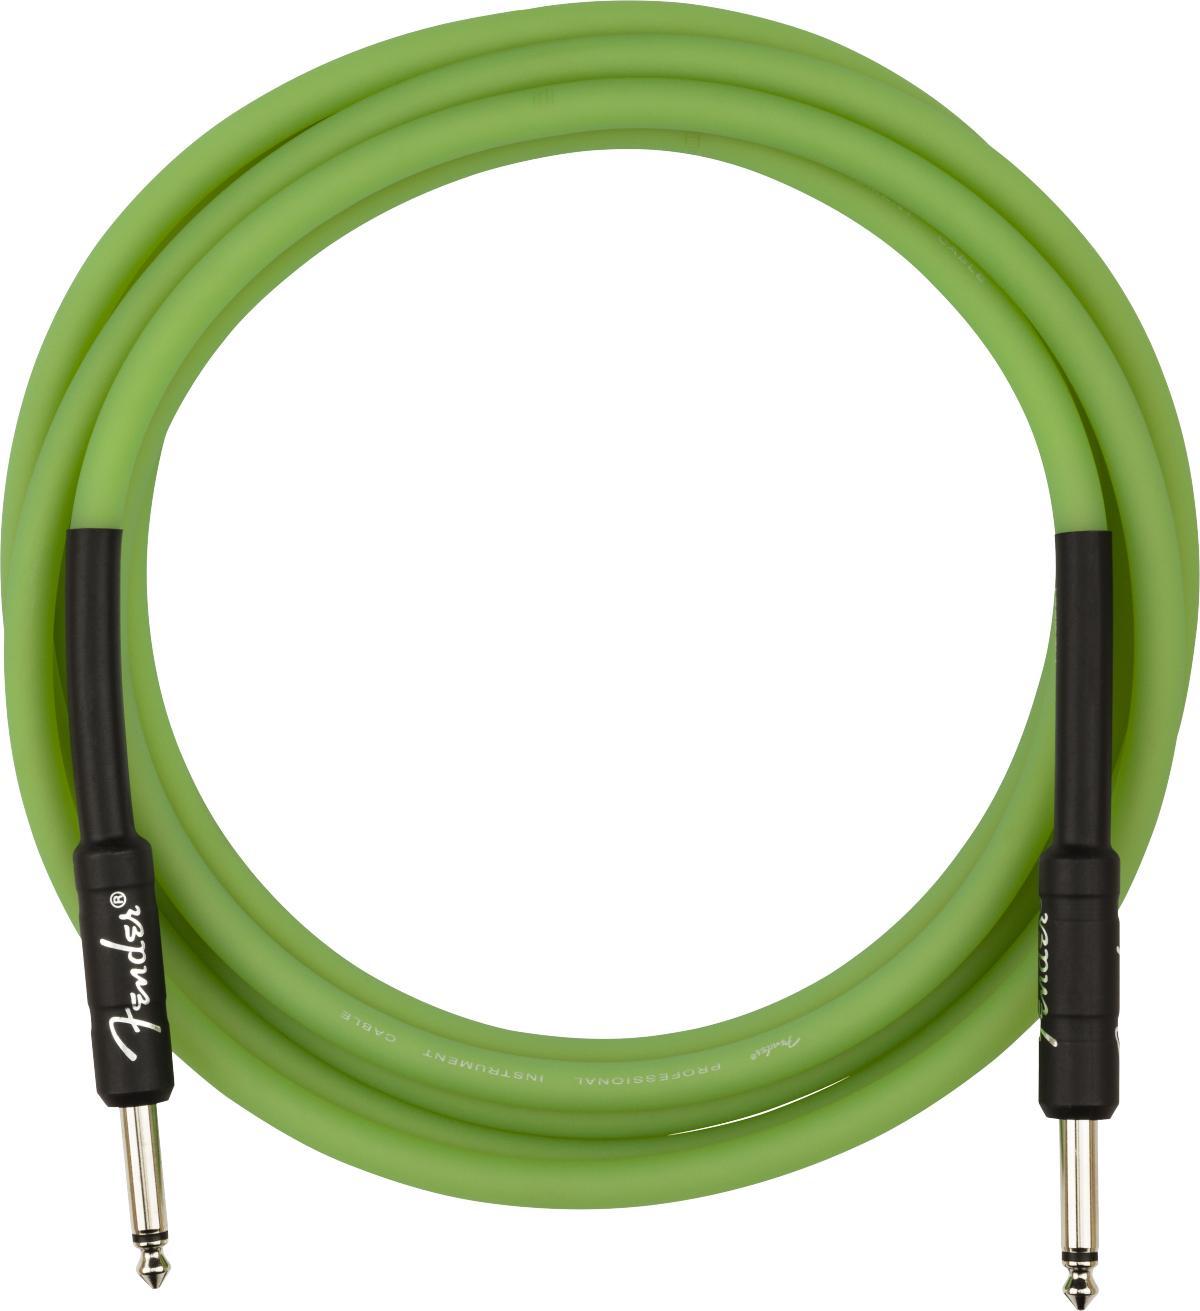 Kabel Fender Pro Glow In The Dark Instrument Cable, 10ft, Straight/Straight - Green